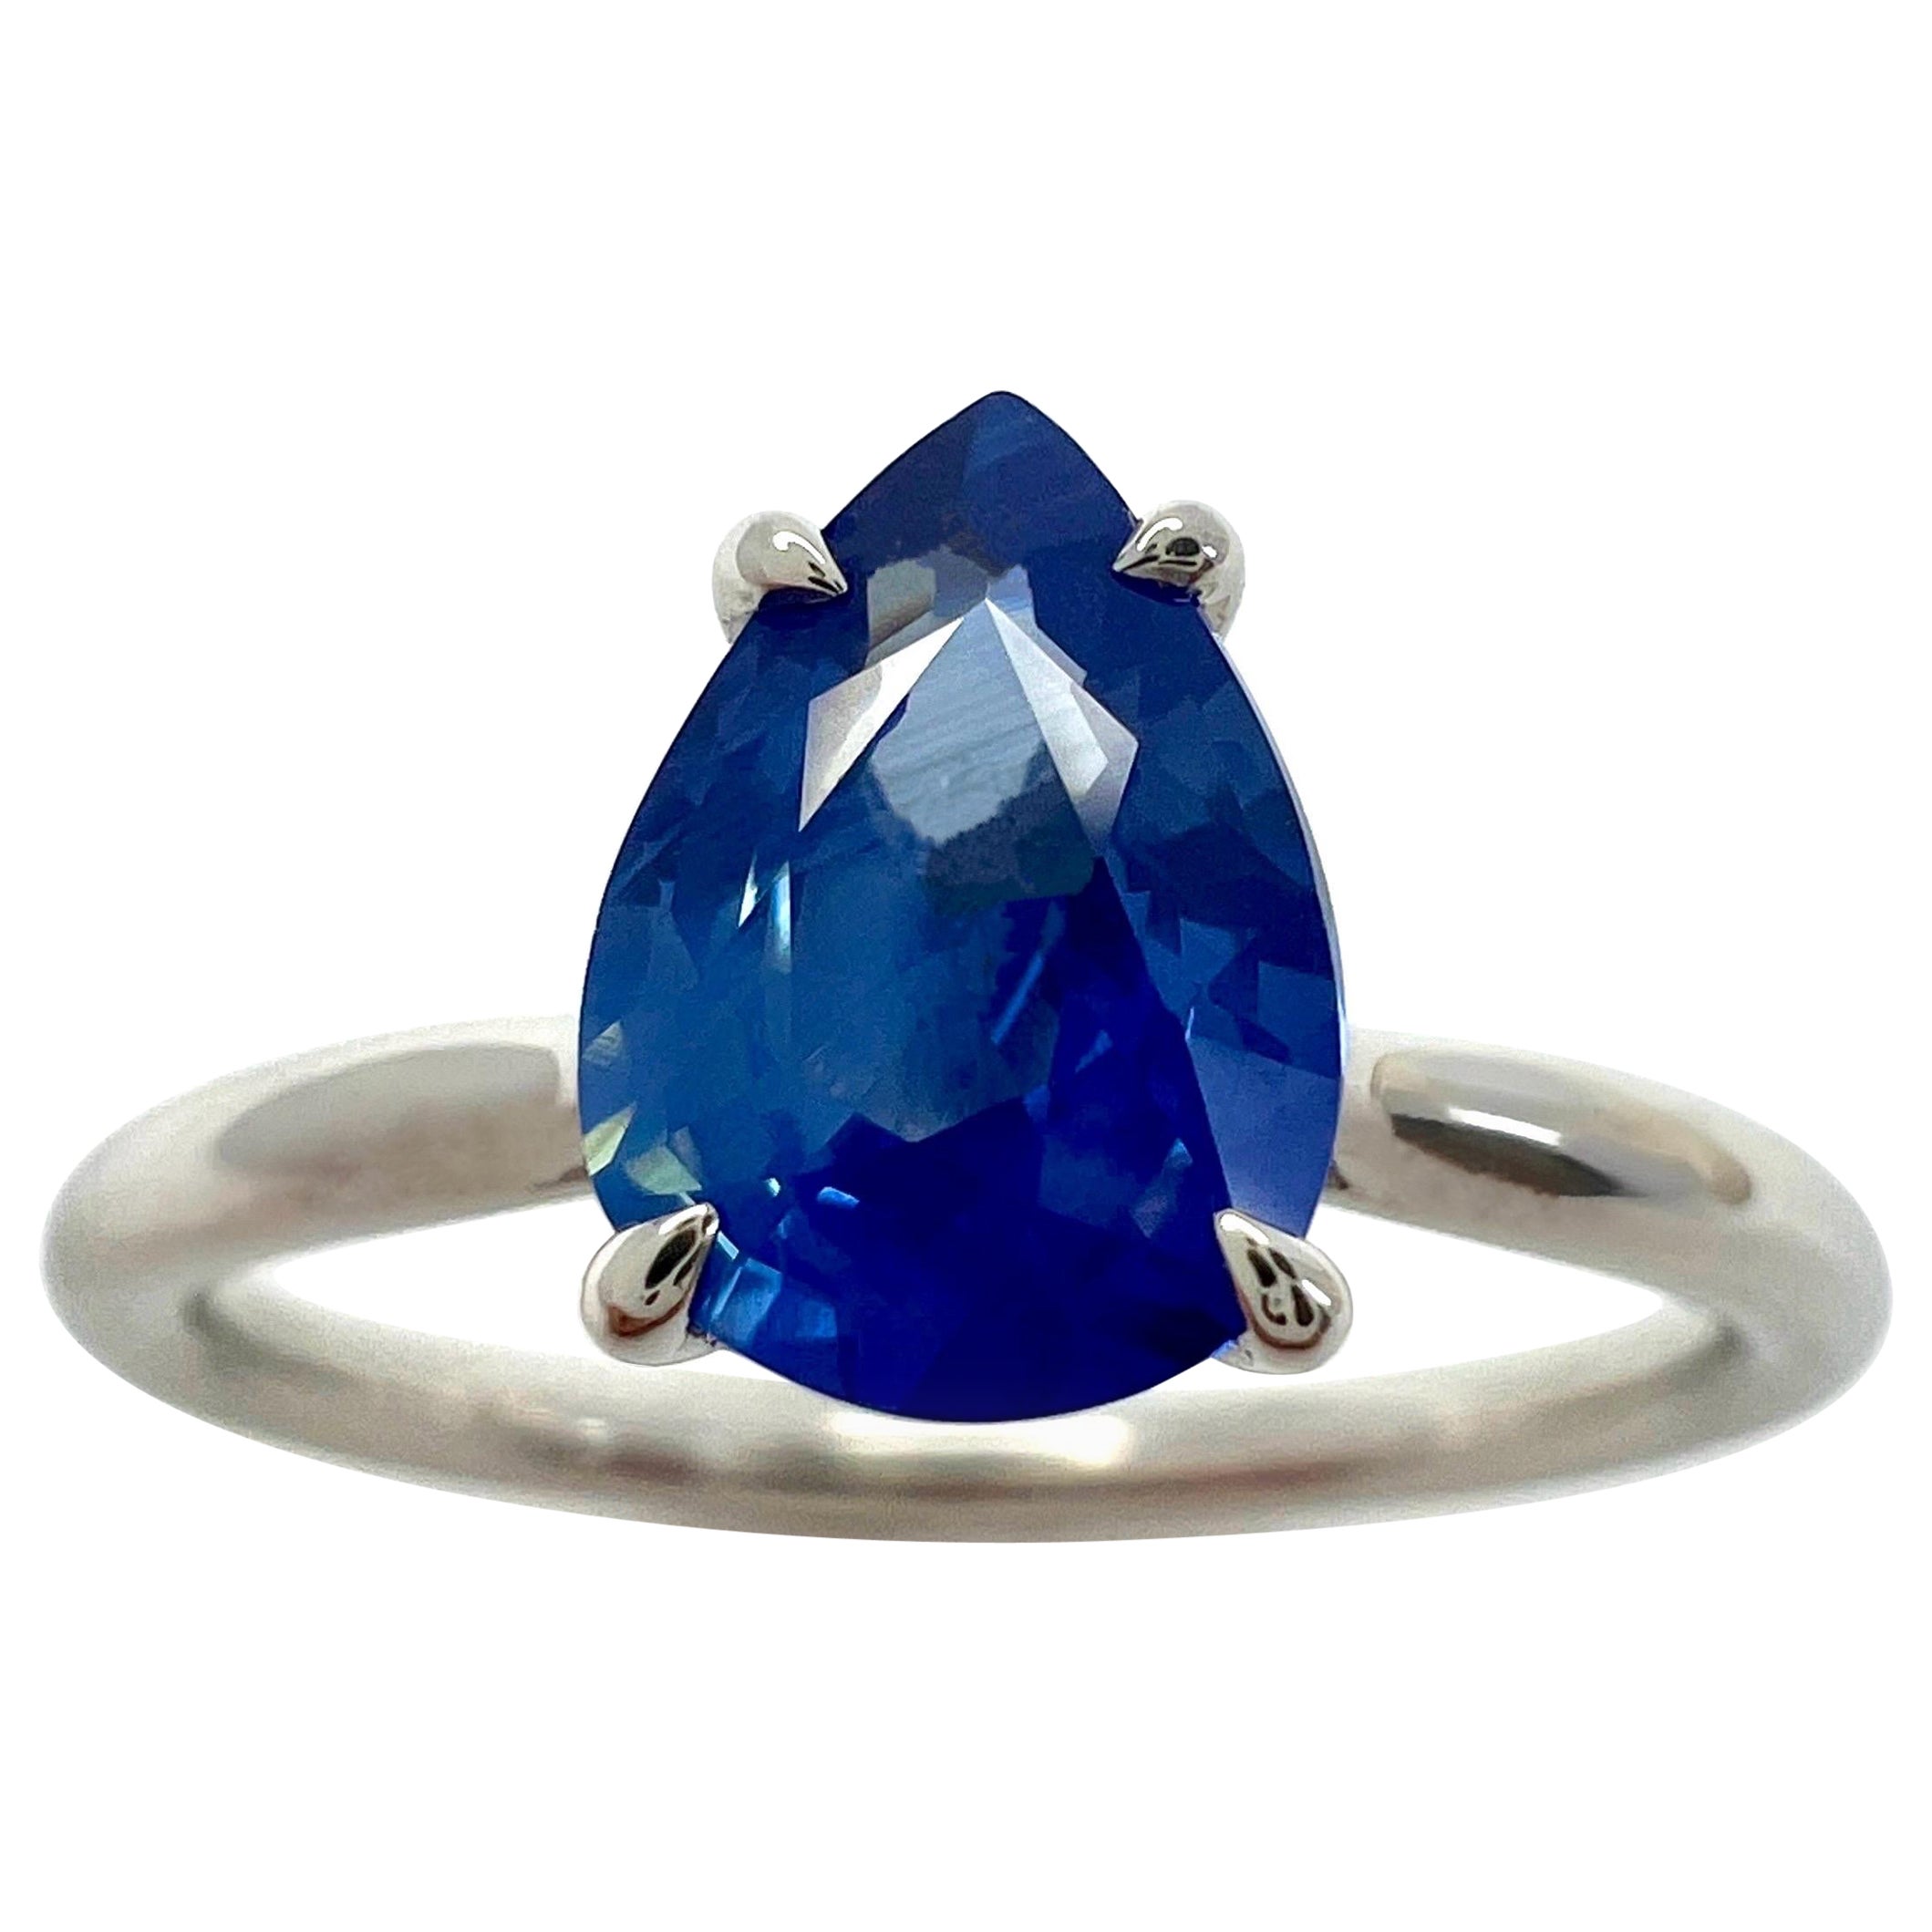 1.17ct Cornflower Blue Sapphire Pear Teardrop Cut 18k White Gold Solitaire Ring For Sale